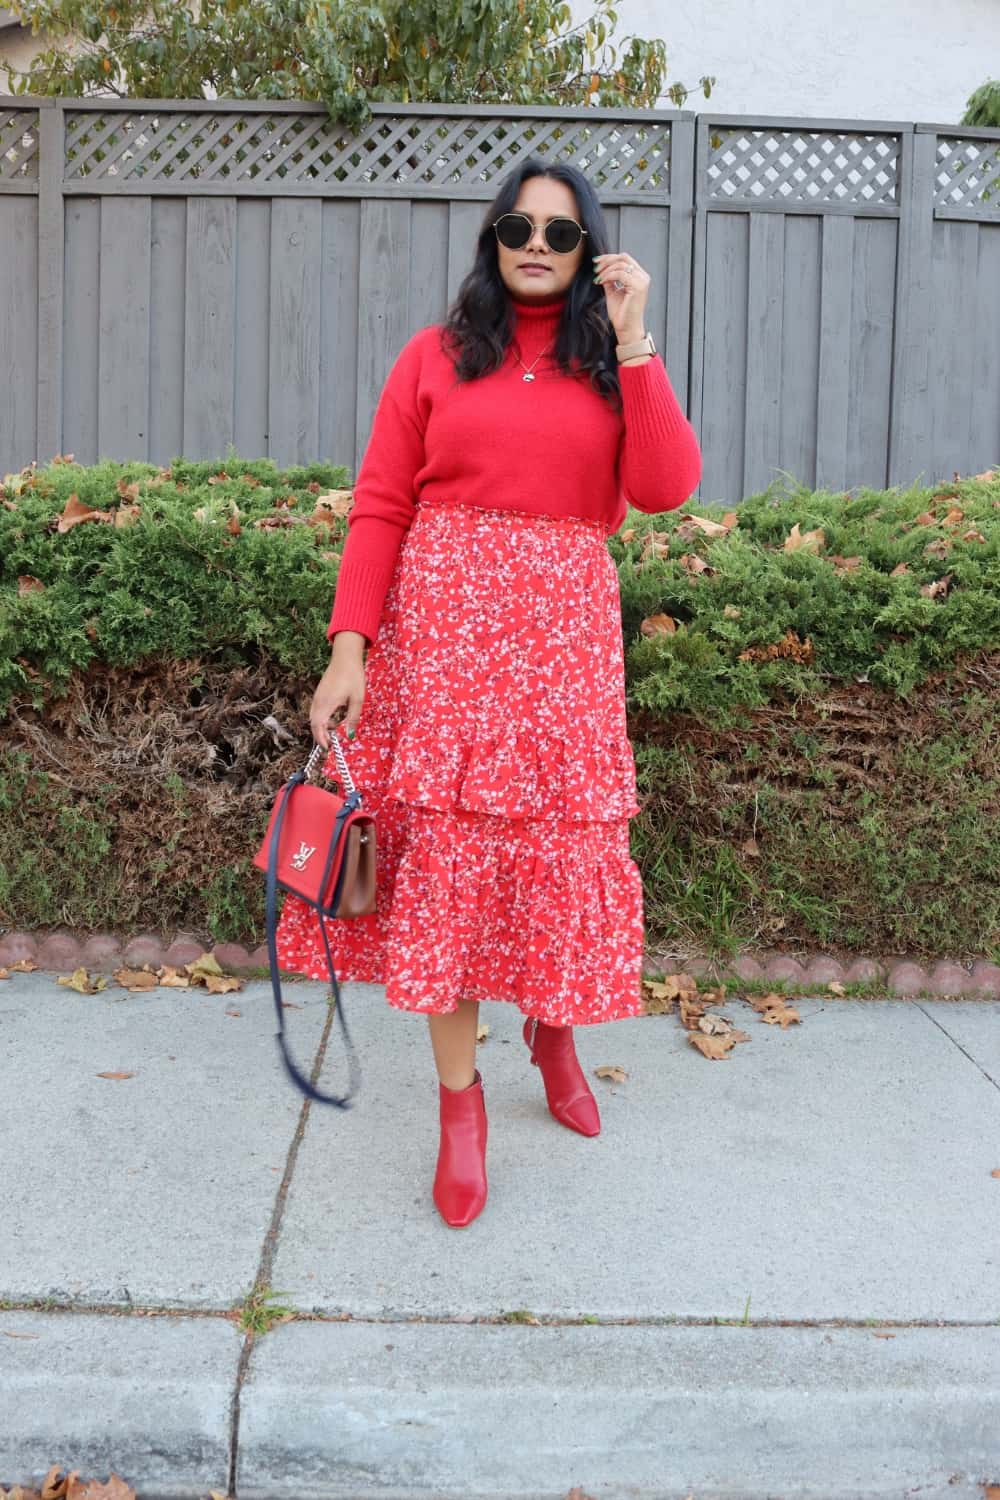 Mixing Fabric with texture of sweater and skirt outfit